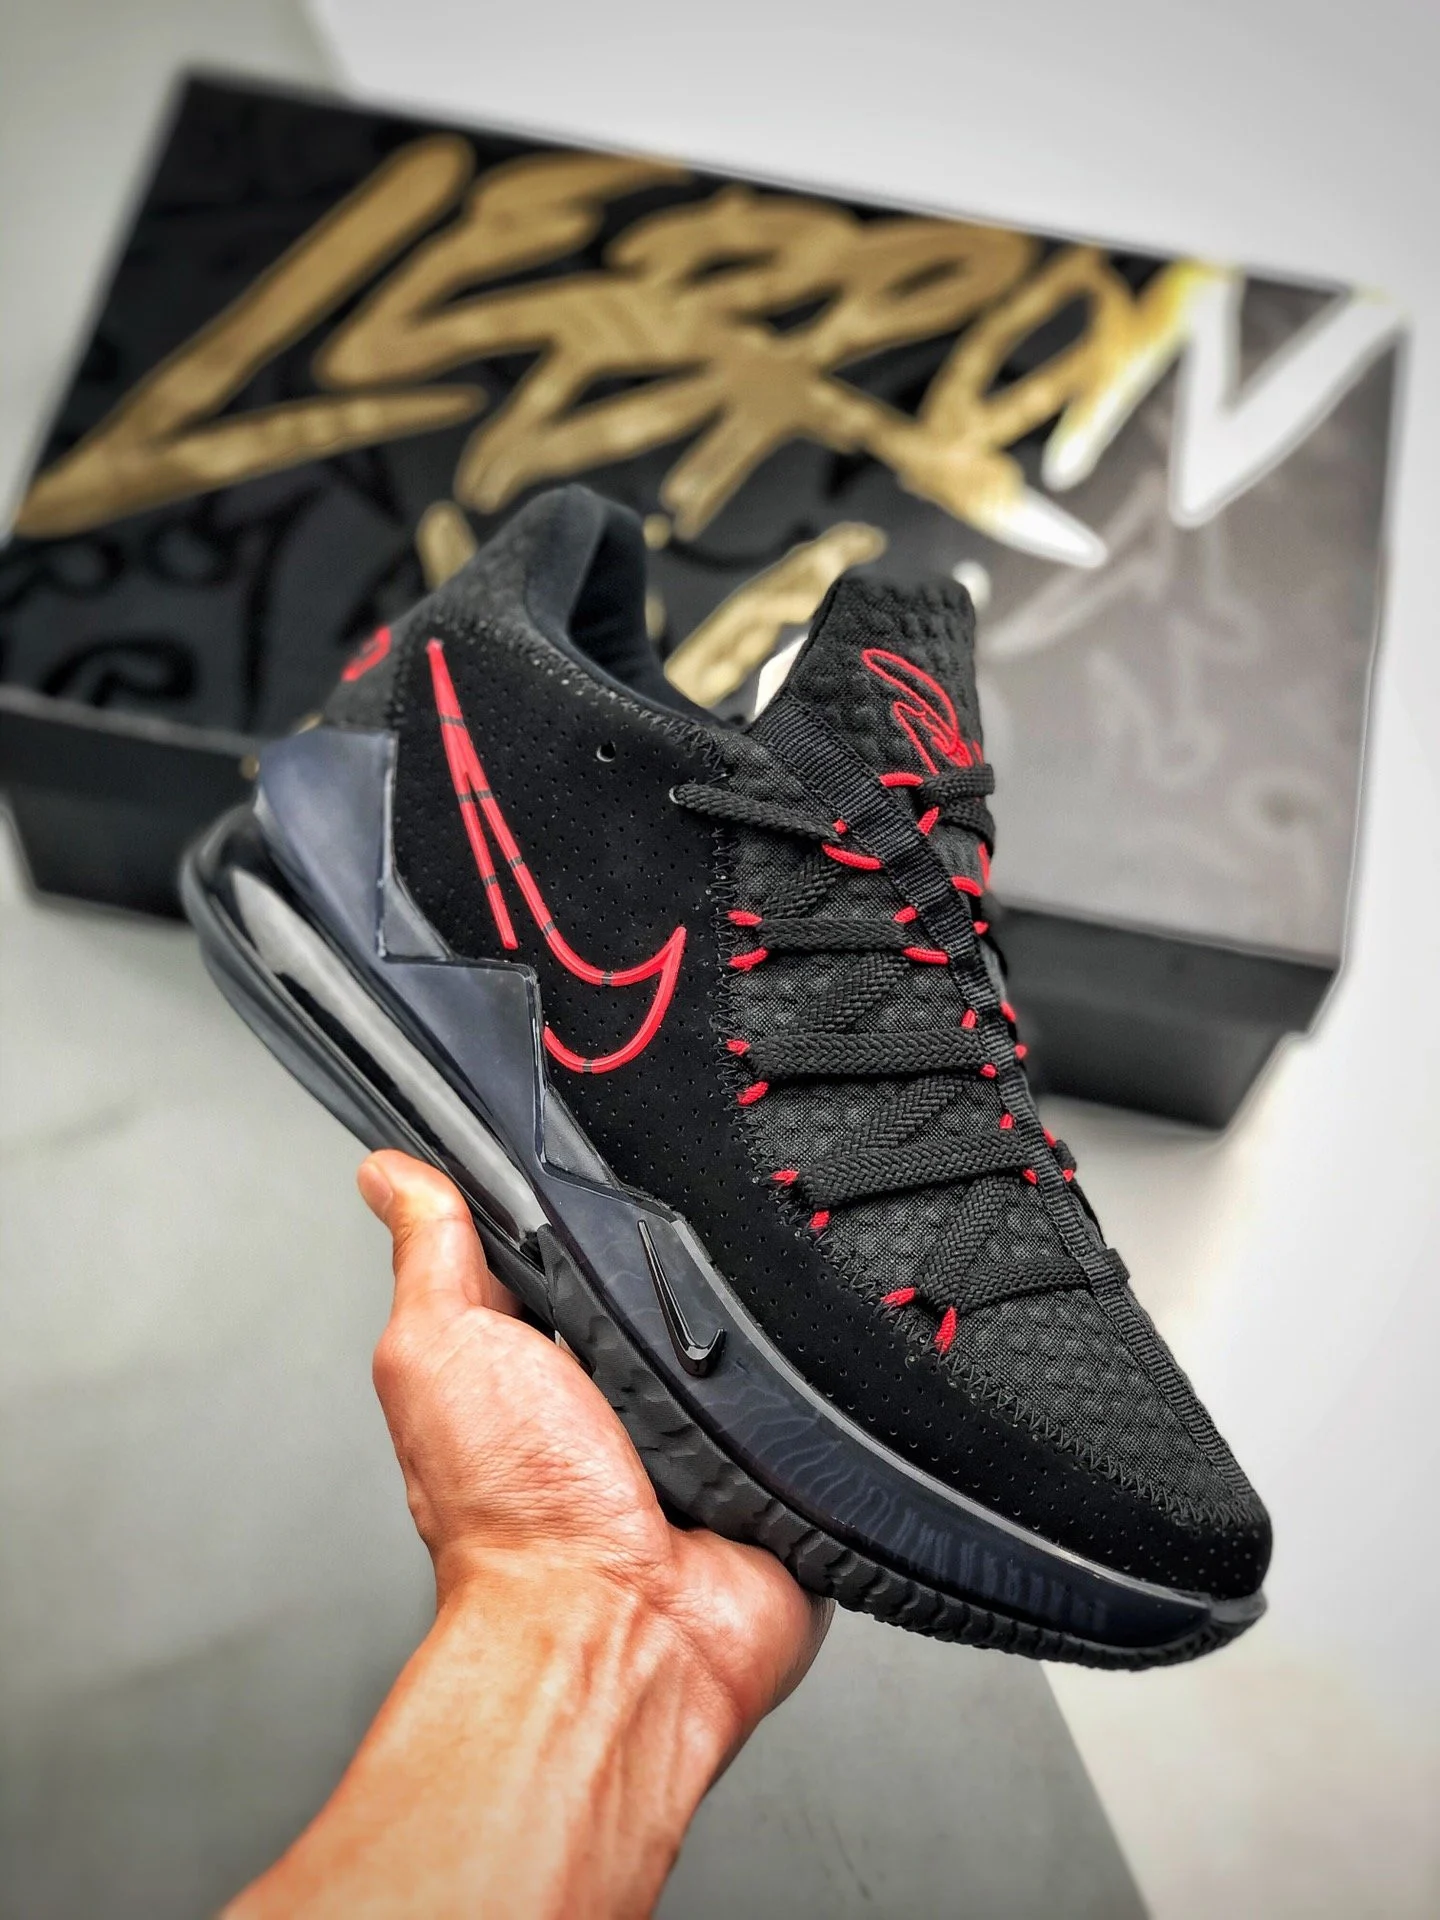 Nike LeBron 17 Low Bred CD5007-001 For Sale